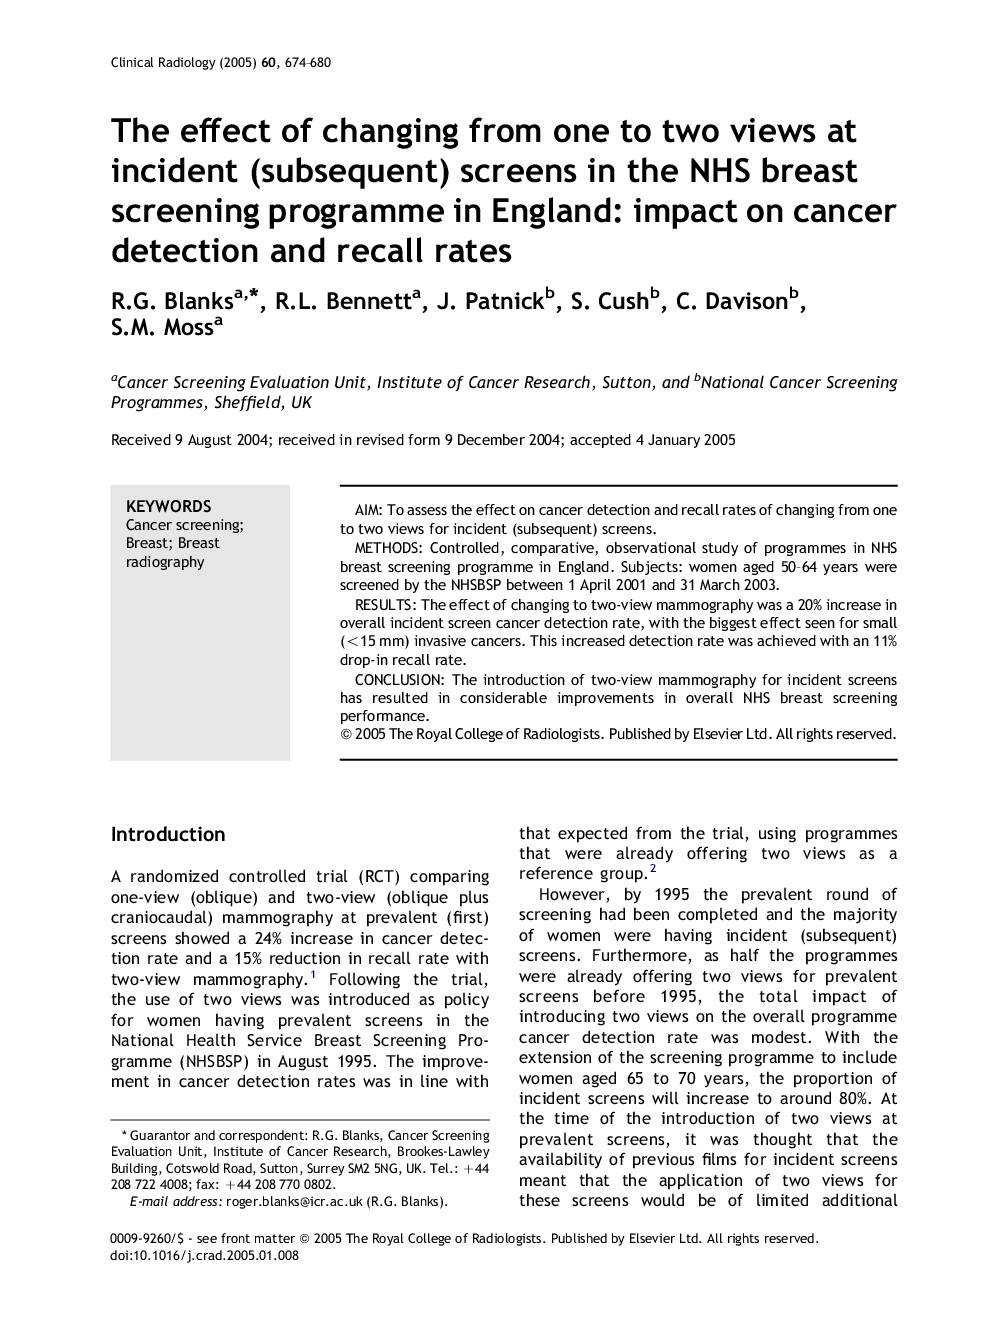 The effect of changing from one to two views at incident (subsequent) screens in the NHS breast screening programme in England: impact on cancer detection and recall rates